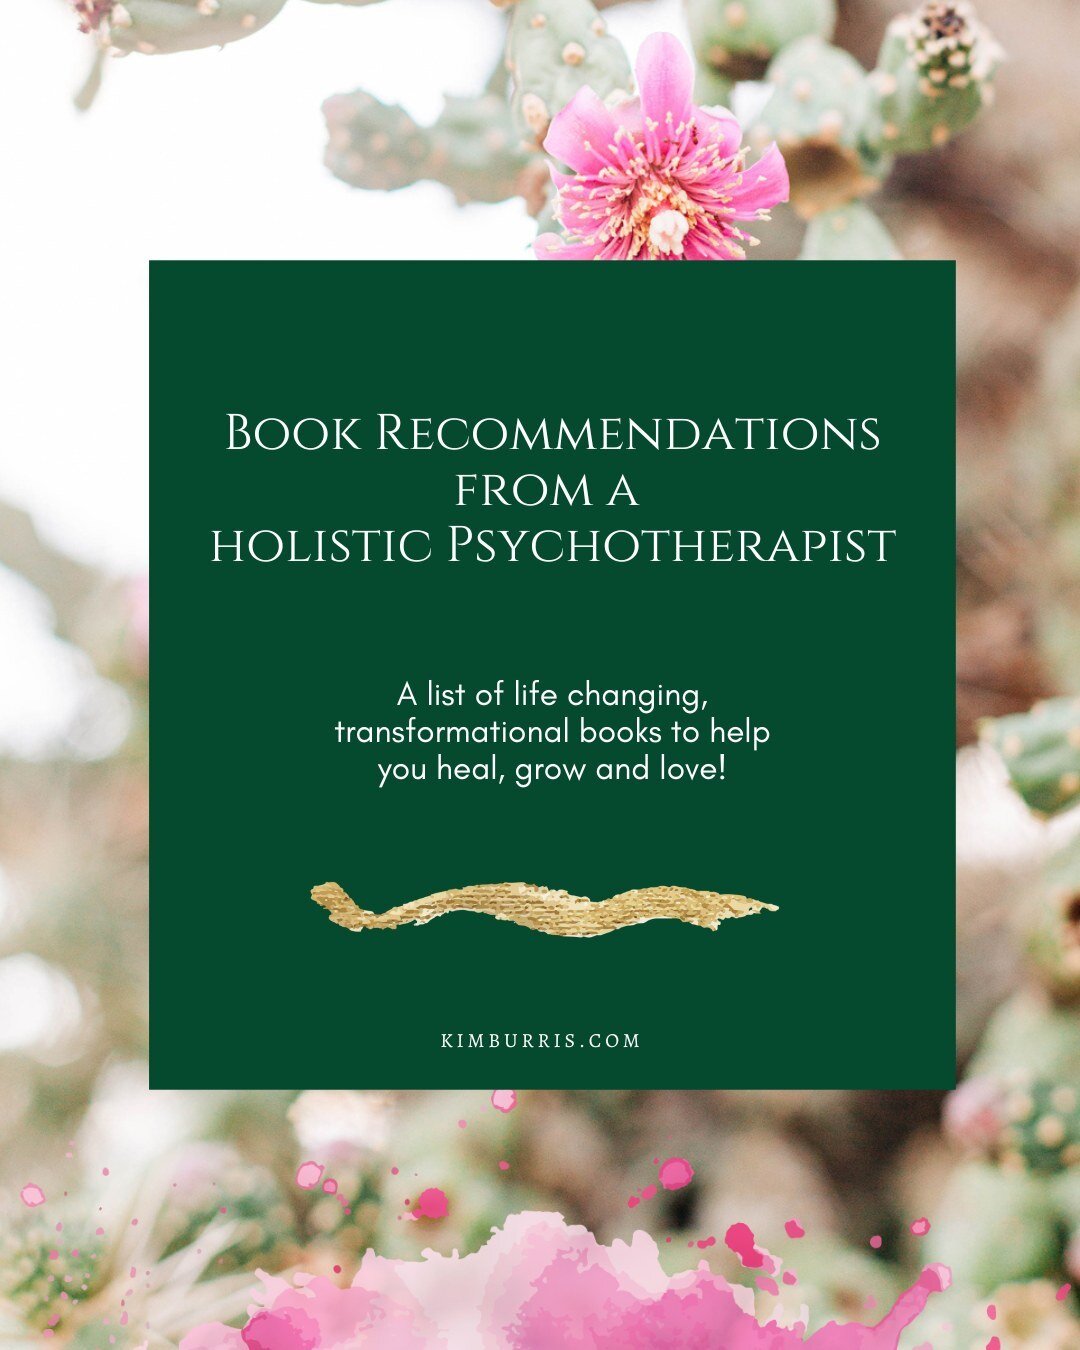 The right book at the right time has the power to uplift, inspire and supercharge your healing. ⚡ 

&lsquo;Book Recommendations from a Holistic Psychotherapist&rsquo;  includes over 50+ books, and categories ranging from spirituality and trauma, to s